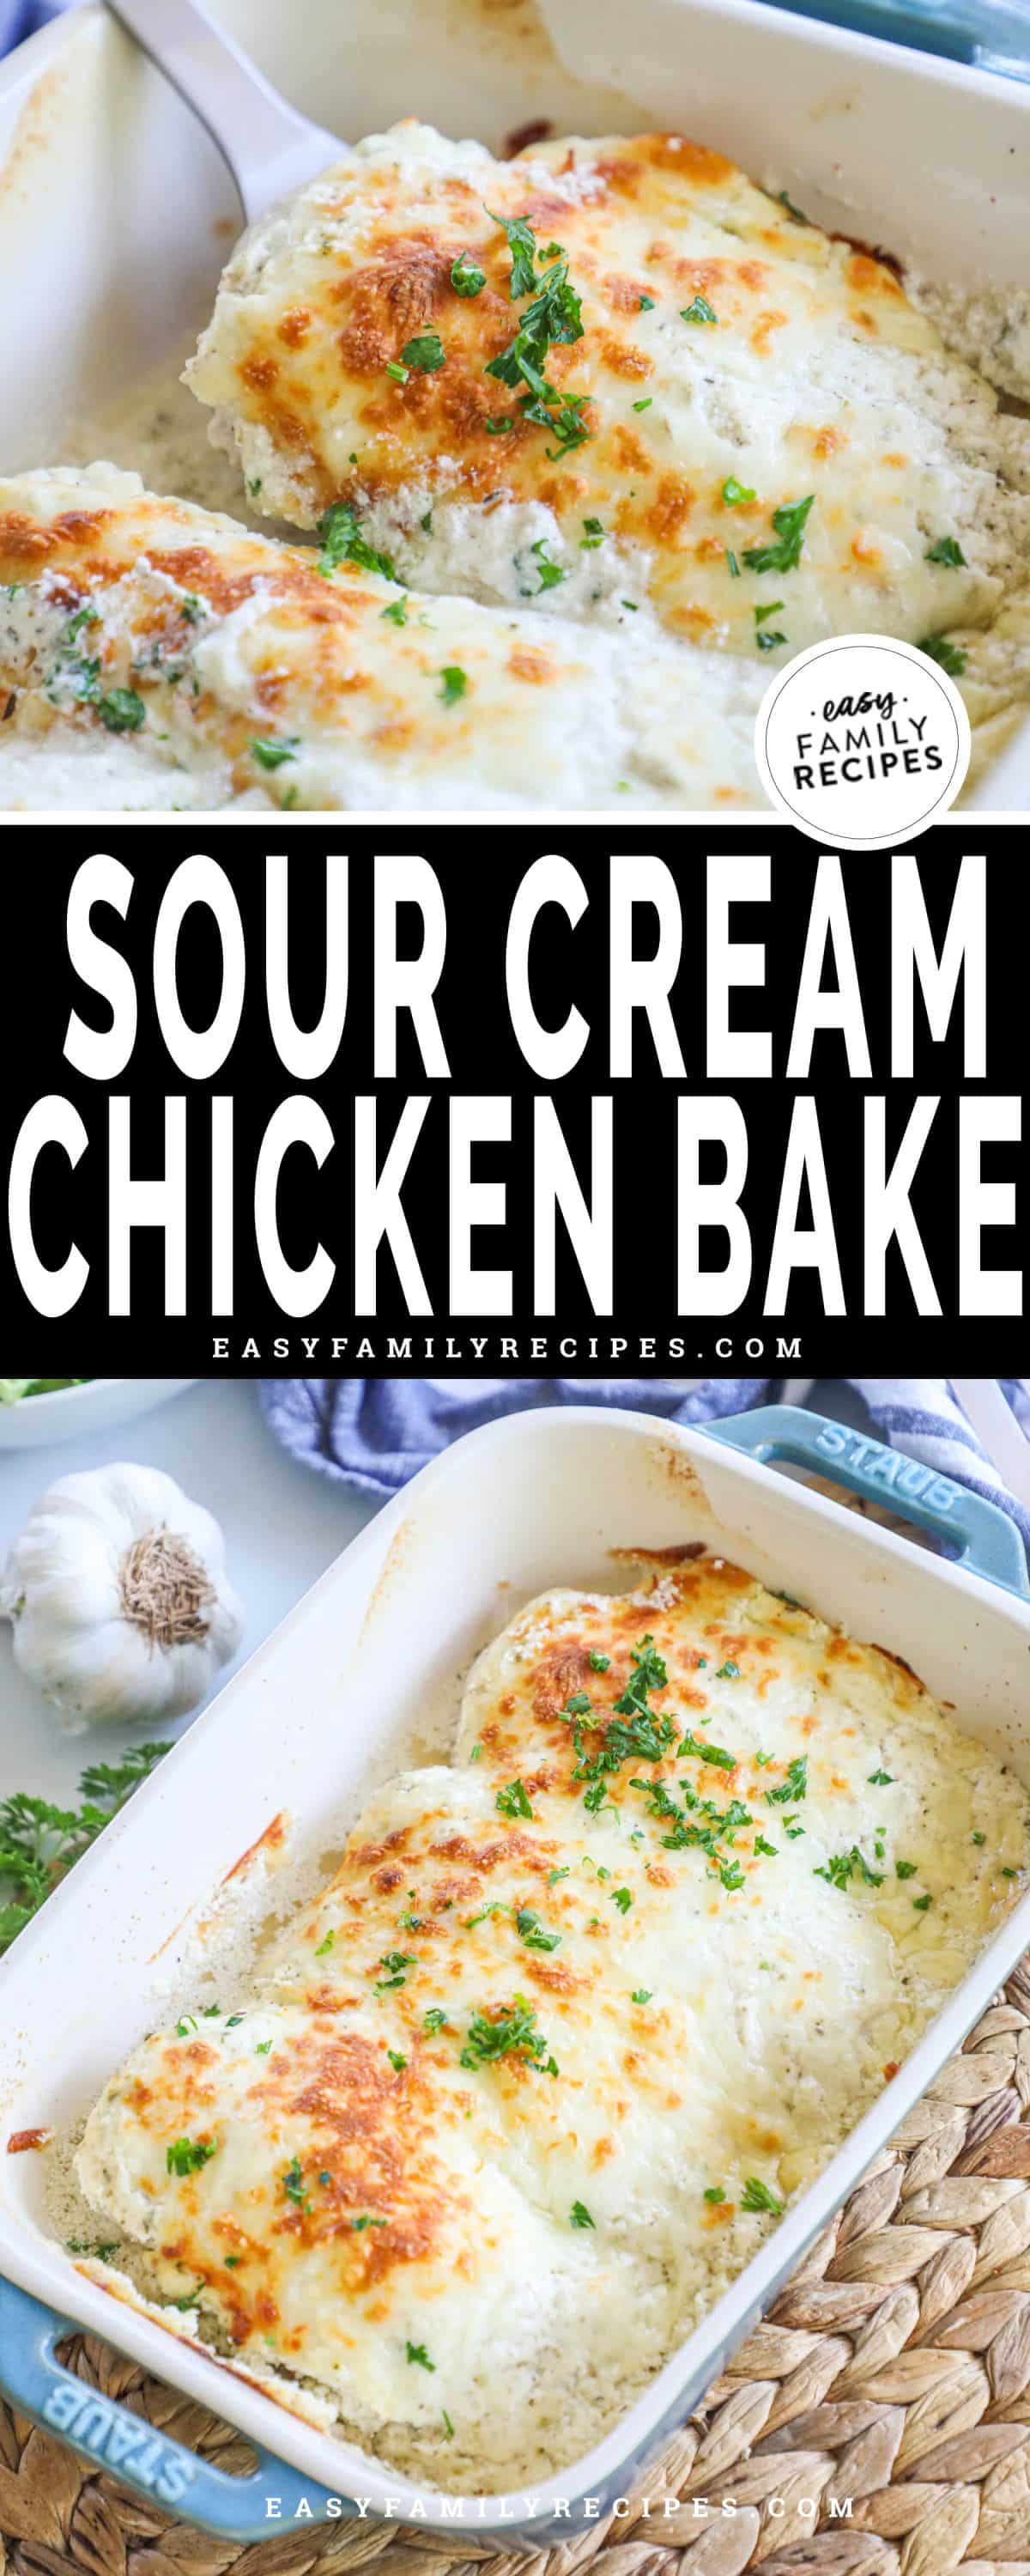 Sour cream chicken in a casserole with a golden brown top and spatula taking a piece out of the casserole.